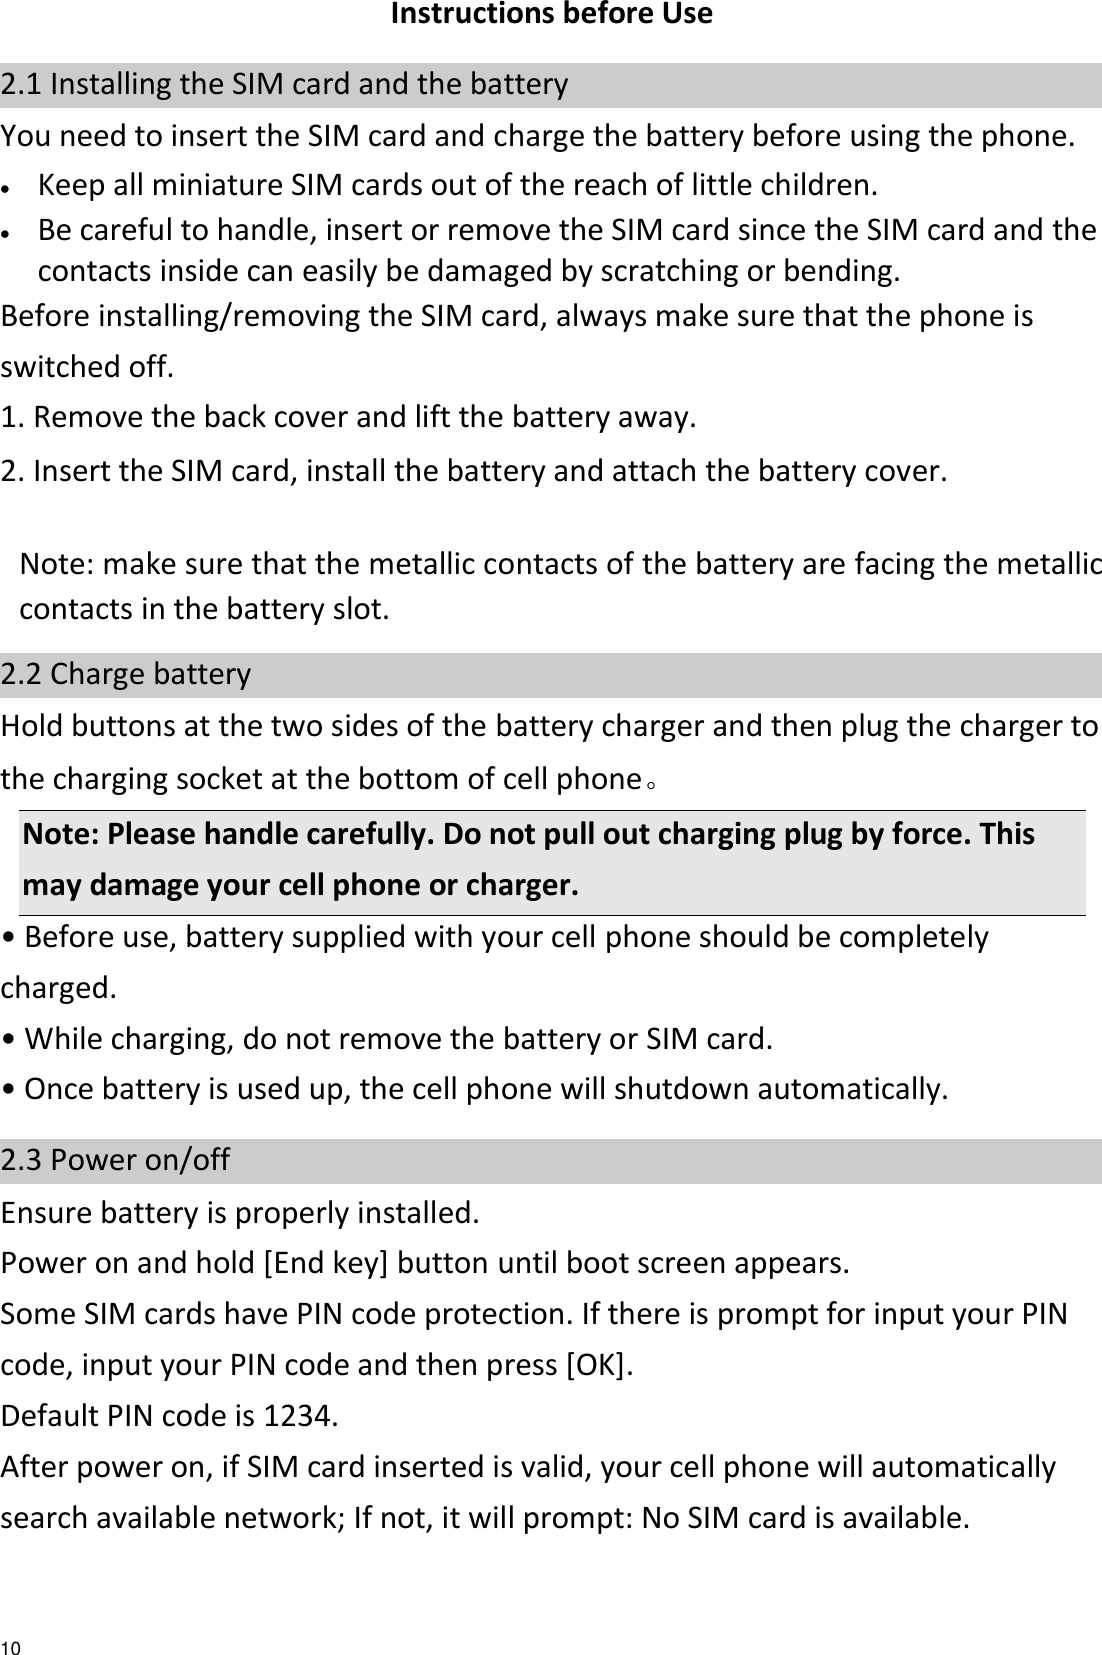   10 Instructions before Use 2.1 Installing the SIM card and the battery You need to insert the SIM card and charge the battery before using the phone.  Keep all miniature SIM cards out of the reach of little children.  Be careful to handle, insert or remove the SIM card since the SIM card and the contacts inside can easily be damaged by scratching or bending. Before installing/removing the SIM card, always make sure that the phone is switched off. 1. Remove the back cover and lift the battery away. 2. Insert the SIM card, install the battery and attach the battery cover.                                                                                 Note: make sure that the metallic contacts of the battery are facing the metallic contacts in the battery slot. 2.2 Charge battery Hold buttons at the two sides of the battery charger and then plug the charger to the charging socket at the bottom of cell phone。   Note: Please handle carefully. Do not pull out charging plug by force. This may damage your cell phone or charger. • Before use, battery supplied with your cell phone should be completely charged. • While charging, do not remove the battery or SIM card. • Once battery is used up, the cell phone will shutdown automatically. 2.3 Power on/off Ensure battery is properly installed. Power on and hold [End key] button until boot screen appears. Some SIM cards have PIN code protection. If there is prompt for input your PIN code, input your PIN code and then press [OK]. Default PIN code is 1234. After power on, if SIM card inserted is valid, your cell phone will automatically search available network; If not, it will prompt: No SIM card is available. 